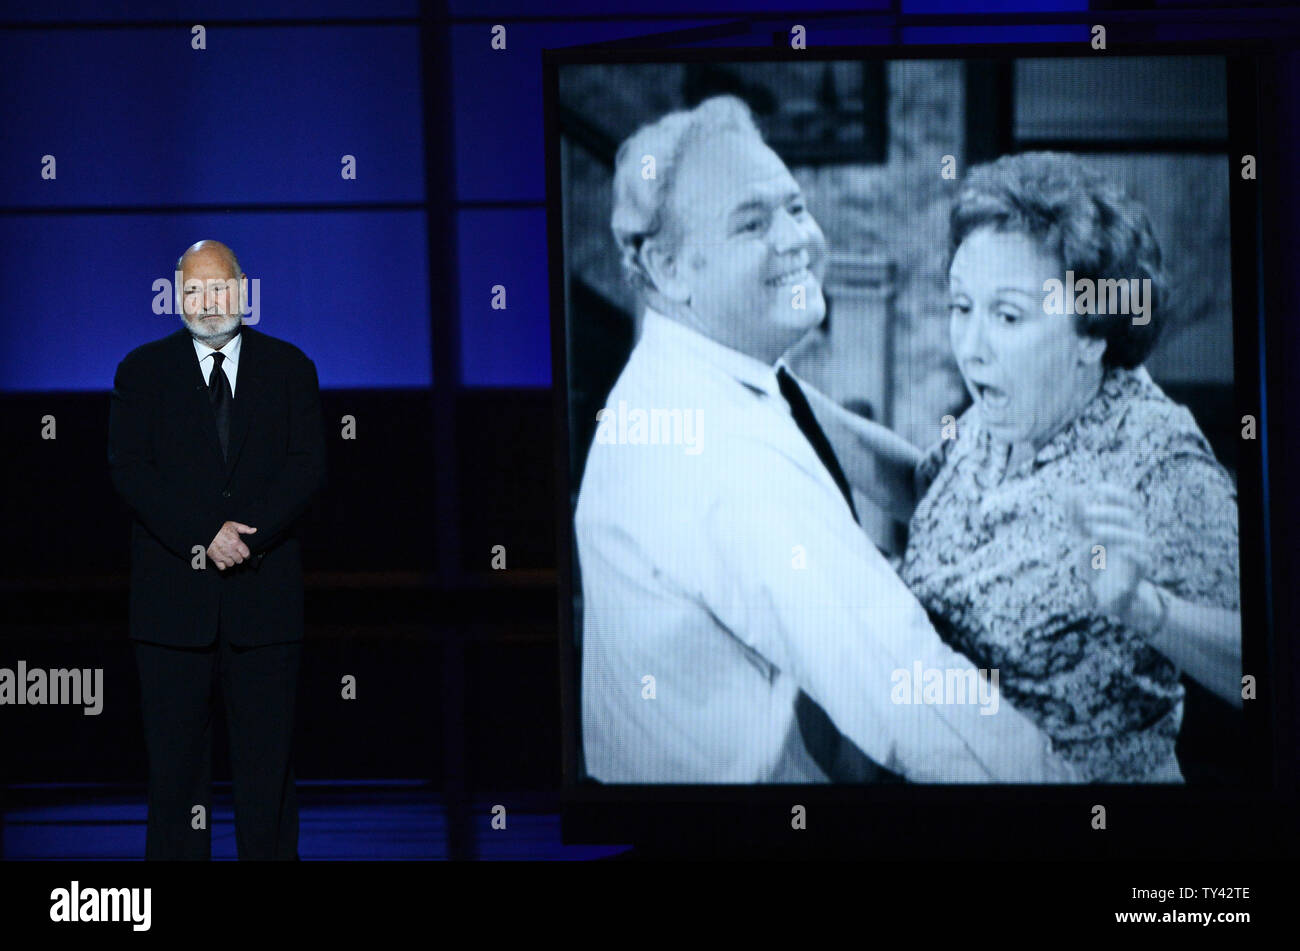 Actor Rob Reiner delivers a memoriam for 'All in the Family' star Jean Stapleton and Carroll O'Connor at the 65th annual Primetime Emmy Awards at Nokia Theatre in Los Angeles on September 22, 2013.   UPI/Jim Ruymen Stock Photo